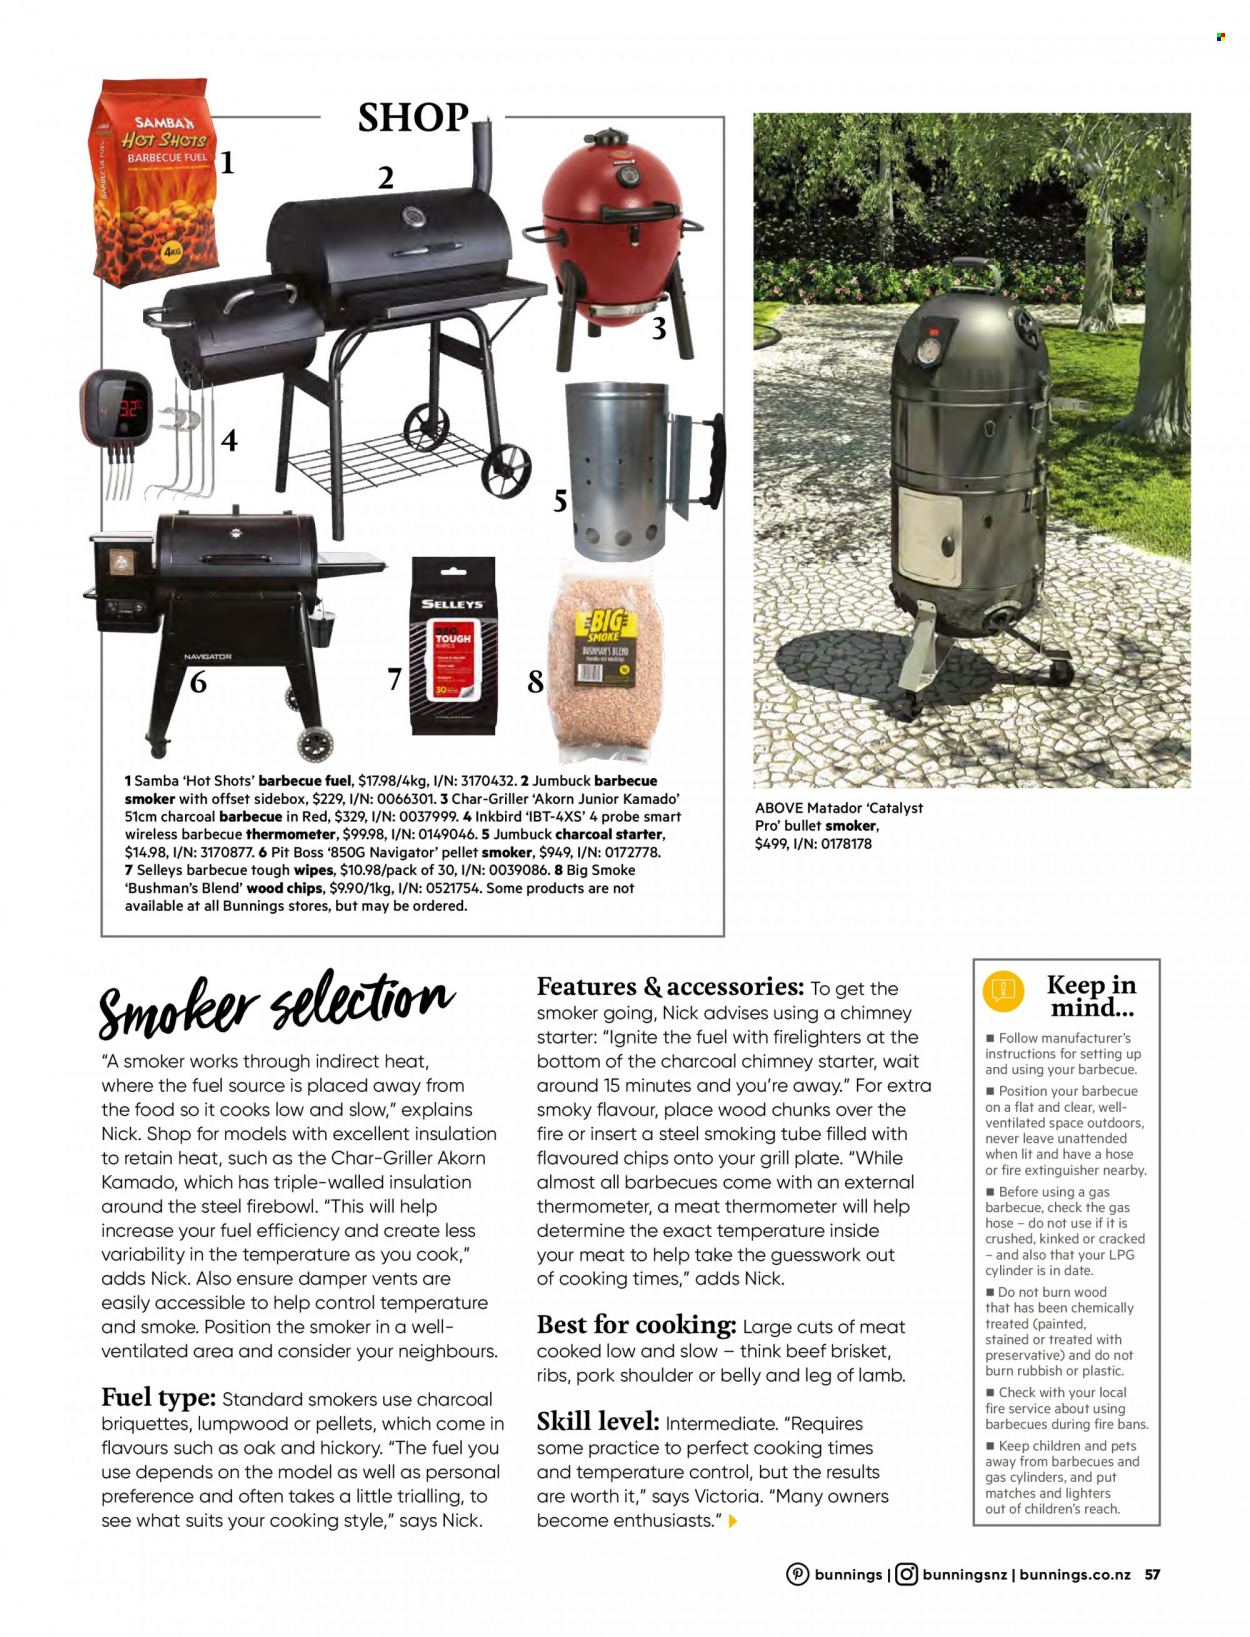 thumbnail - Bunnings Warehouse mailer - Sales products - wipes, thermometer, firelighter, extinguisher, plate, meat thermometer, grill, briquettes, smoker. Page 57.